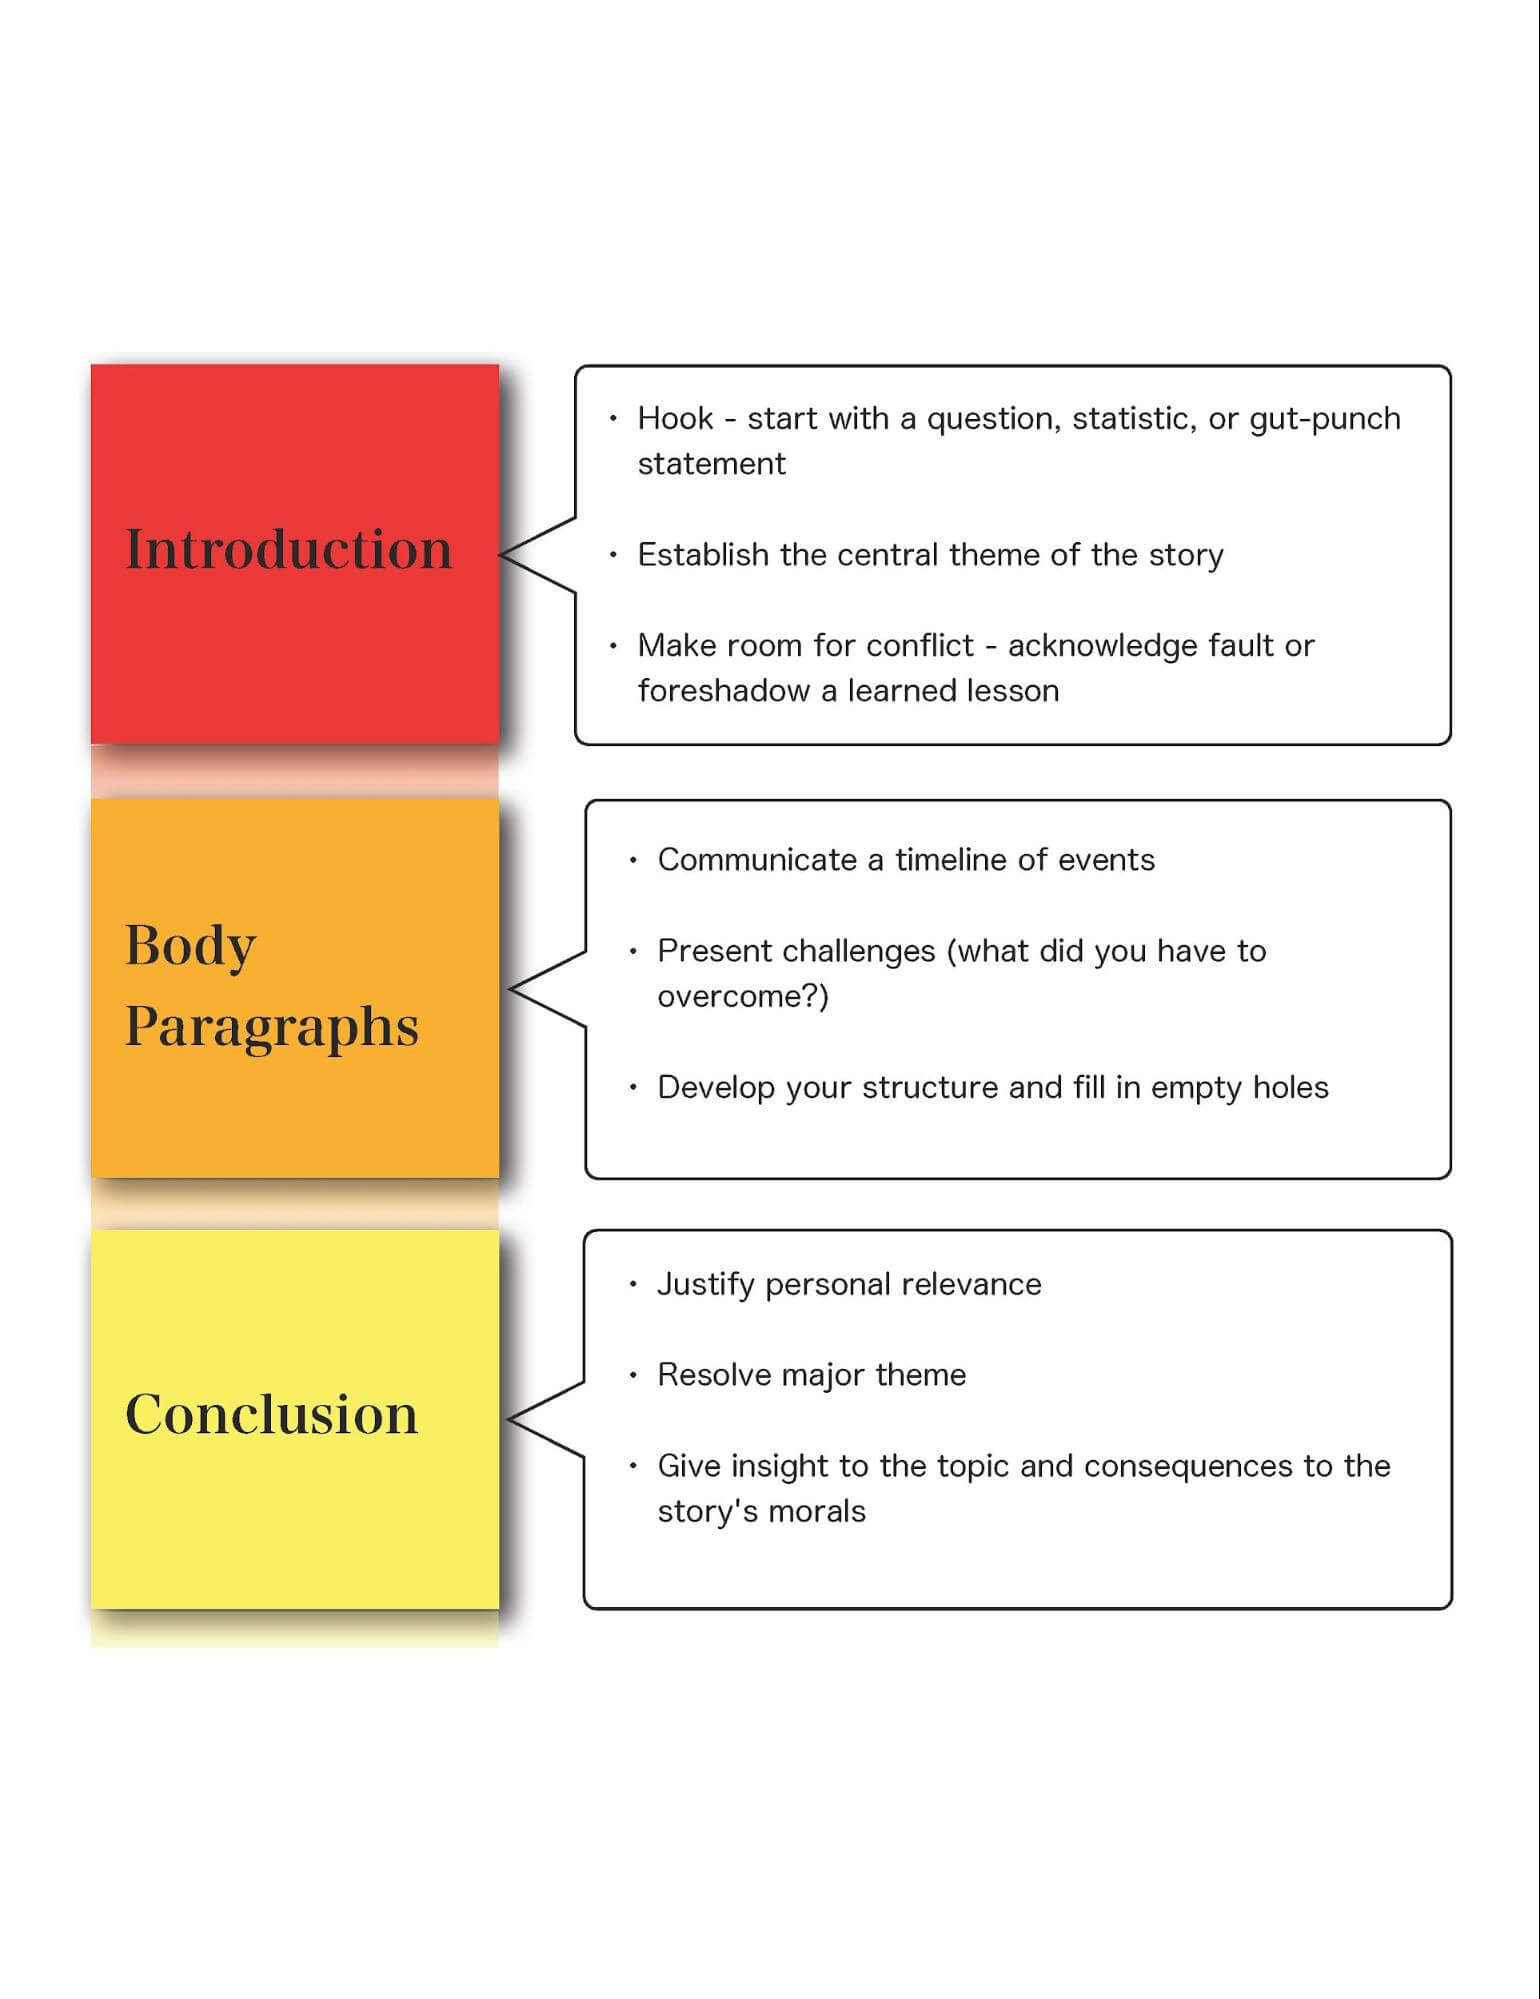 what is the meaning of narrative essay